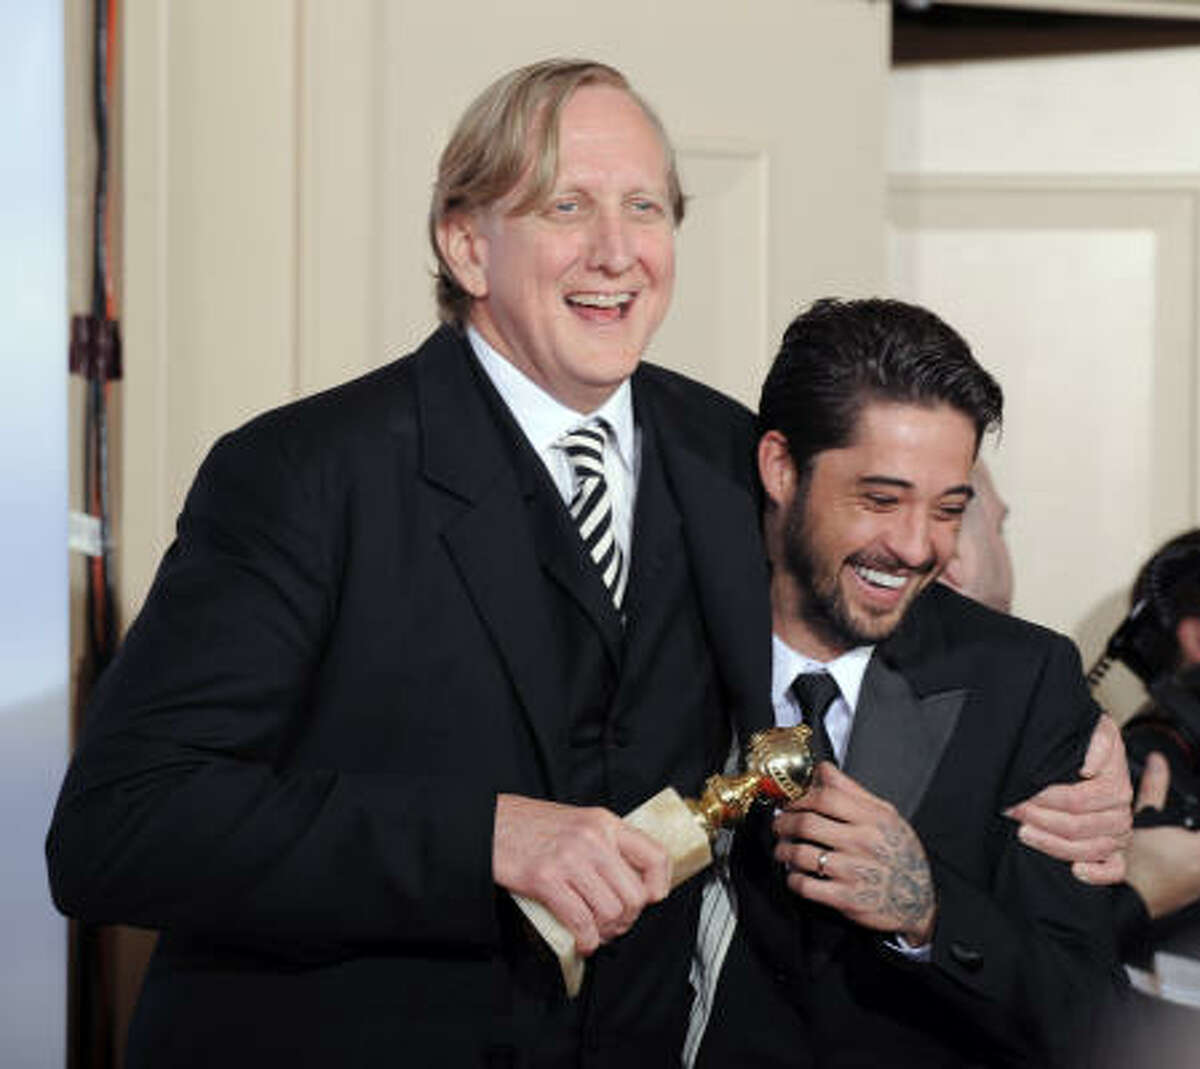 T Bone Burnett and Ryan Bingham are photographed with the award for best original song in a motion picture for Crazy Heart.